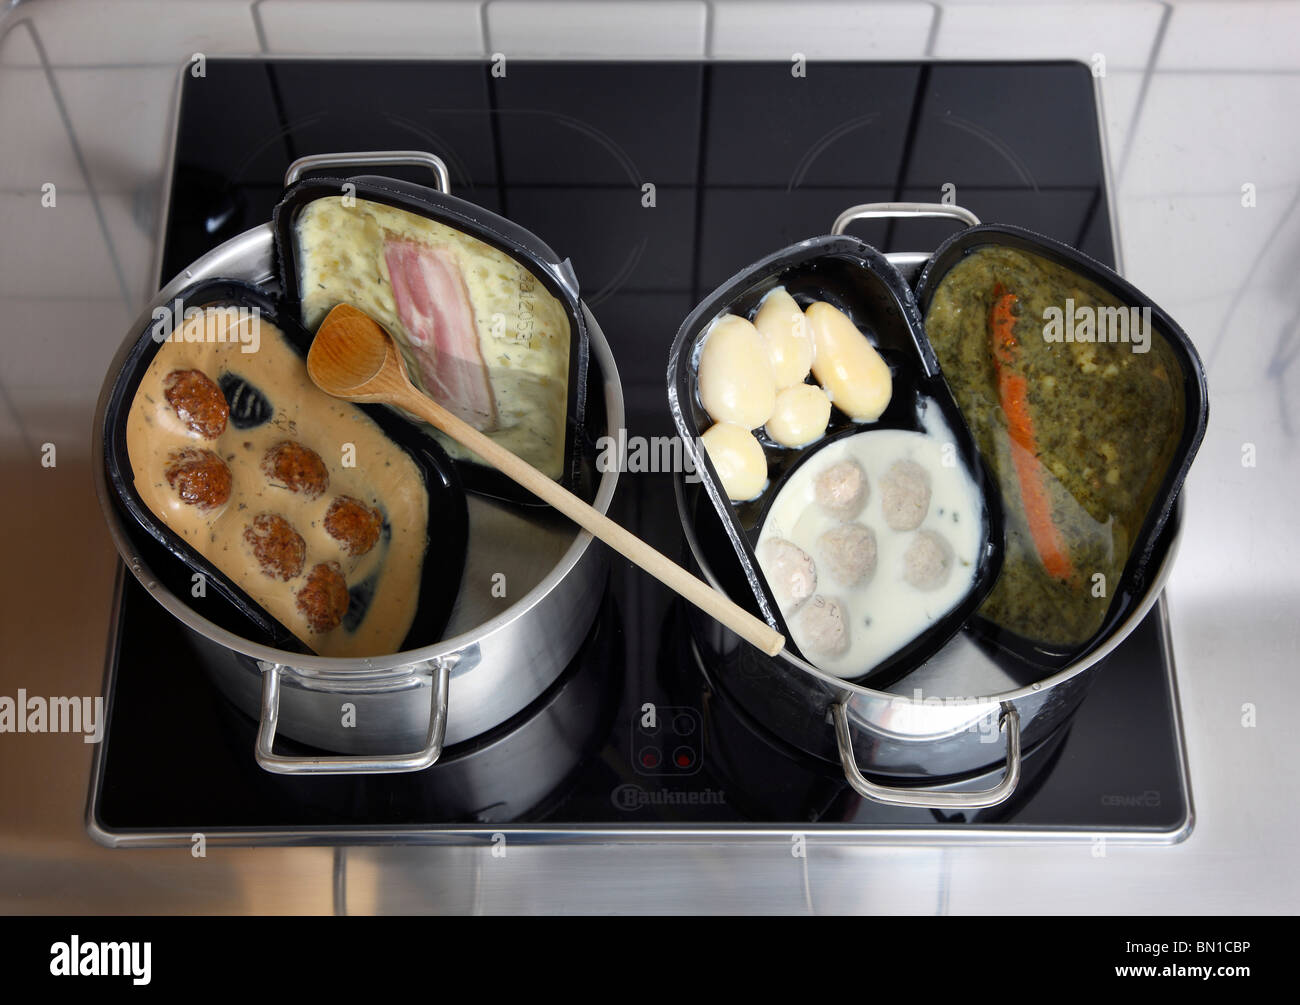 Heating of ready-to-serve meals in hot water. Convenience food products from a supermarket. different dishes, ready to eat. Stock Photo